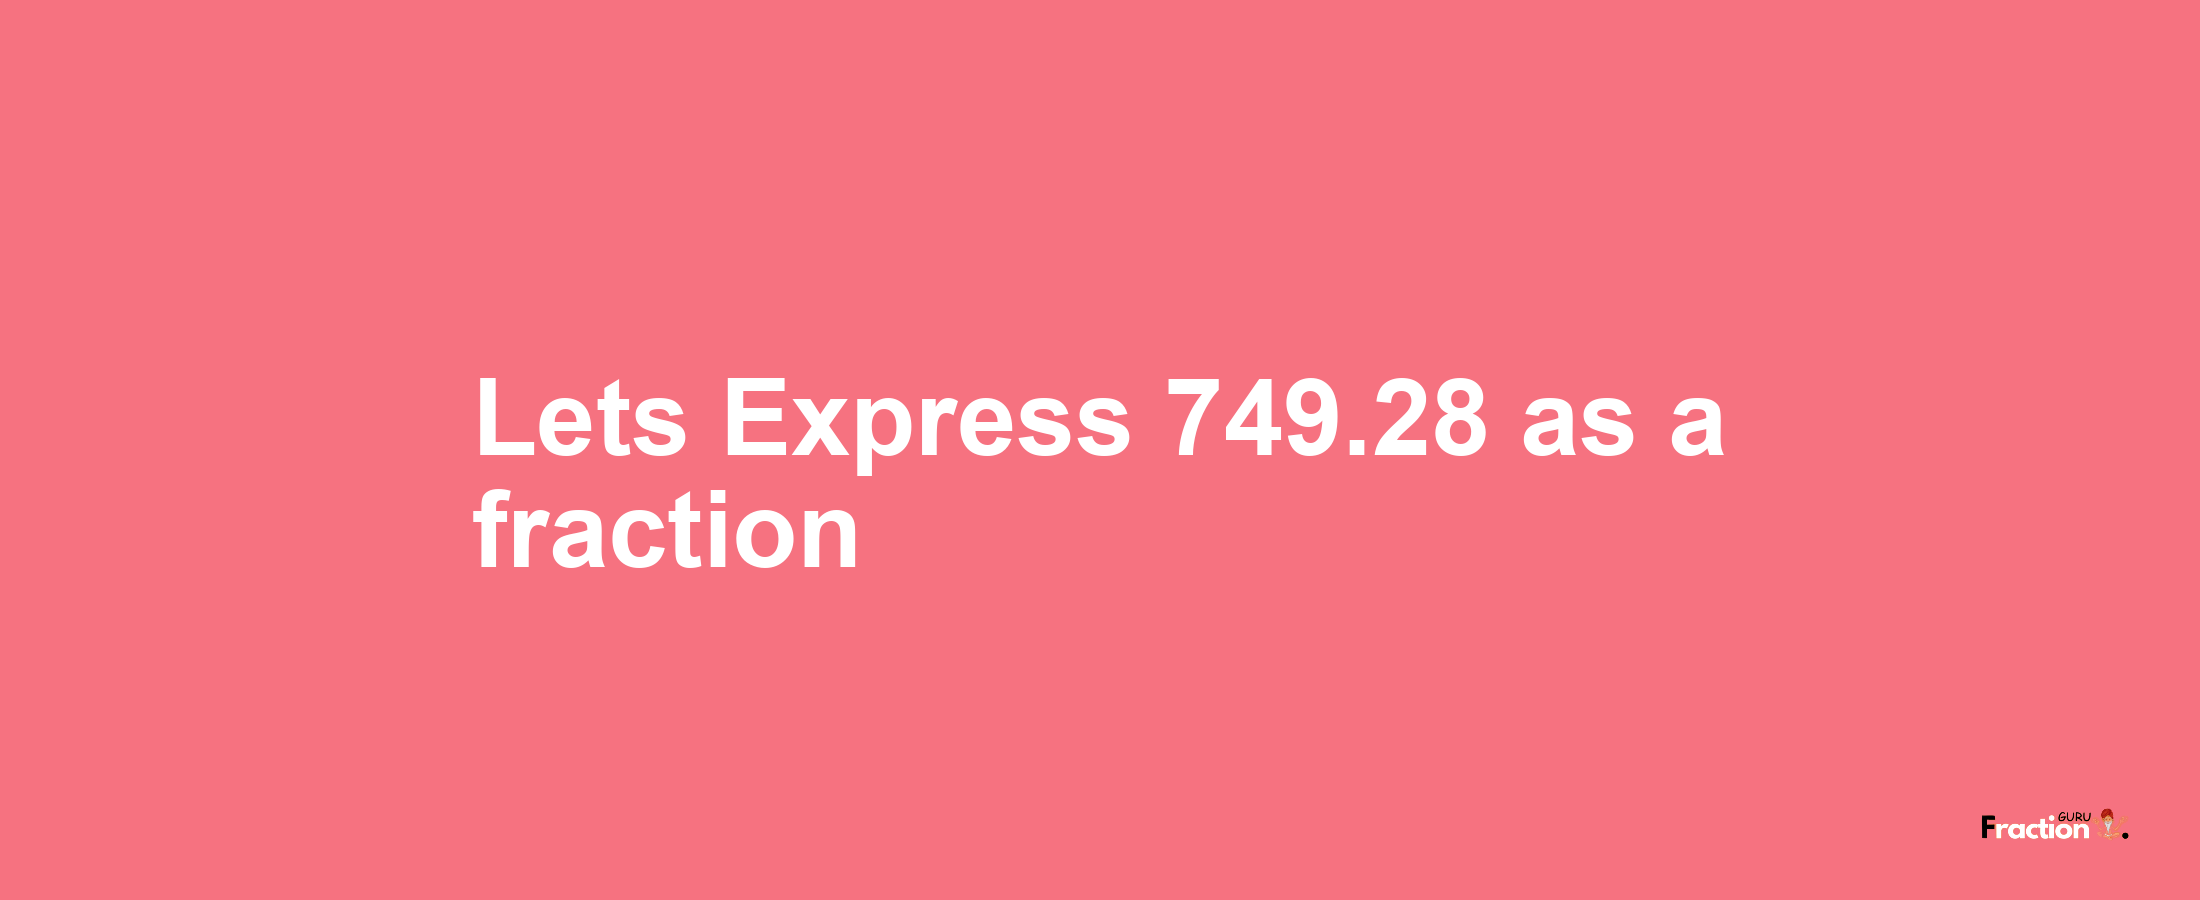 Lets Express 749.28 as afraction